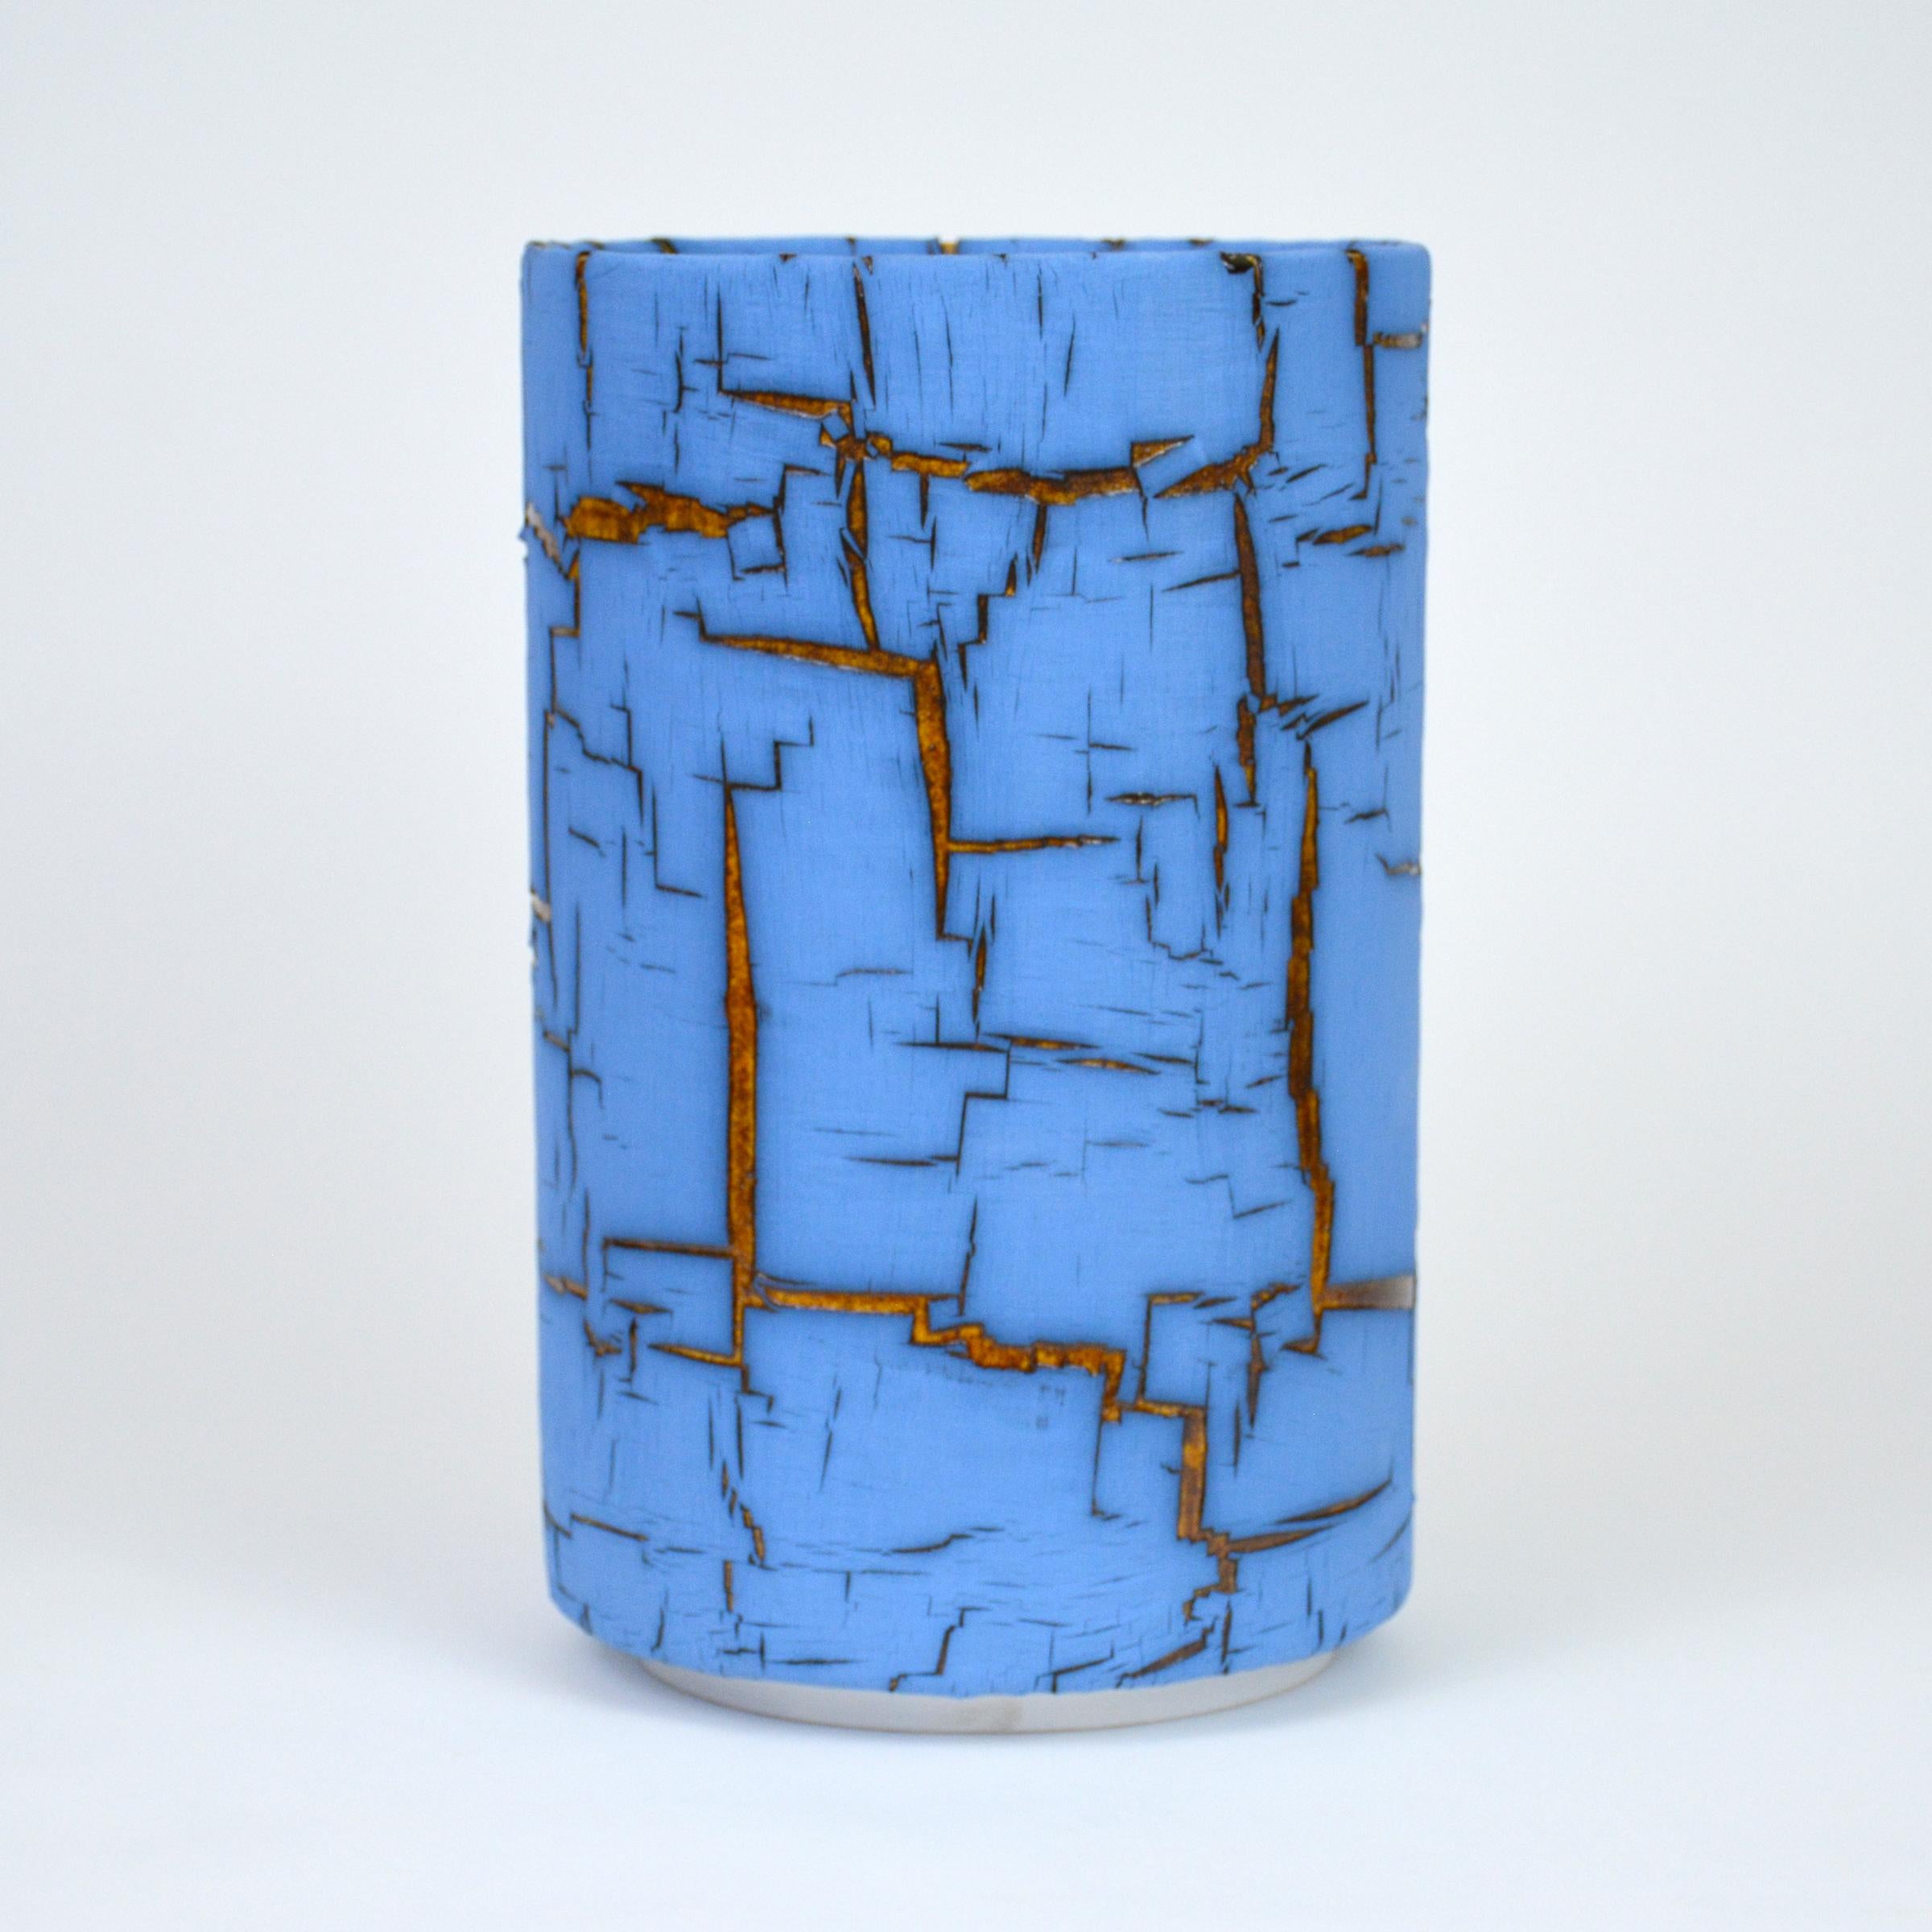 Ceramic Vessel  Cylinder Sculpture  by William Edwards  In New Condition For Sale In Moreno Valley, CA